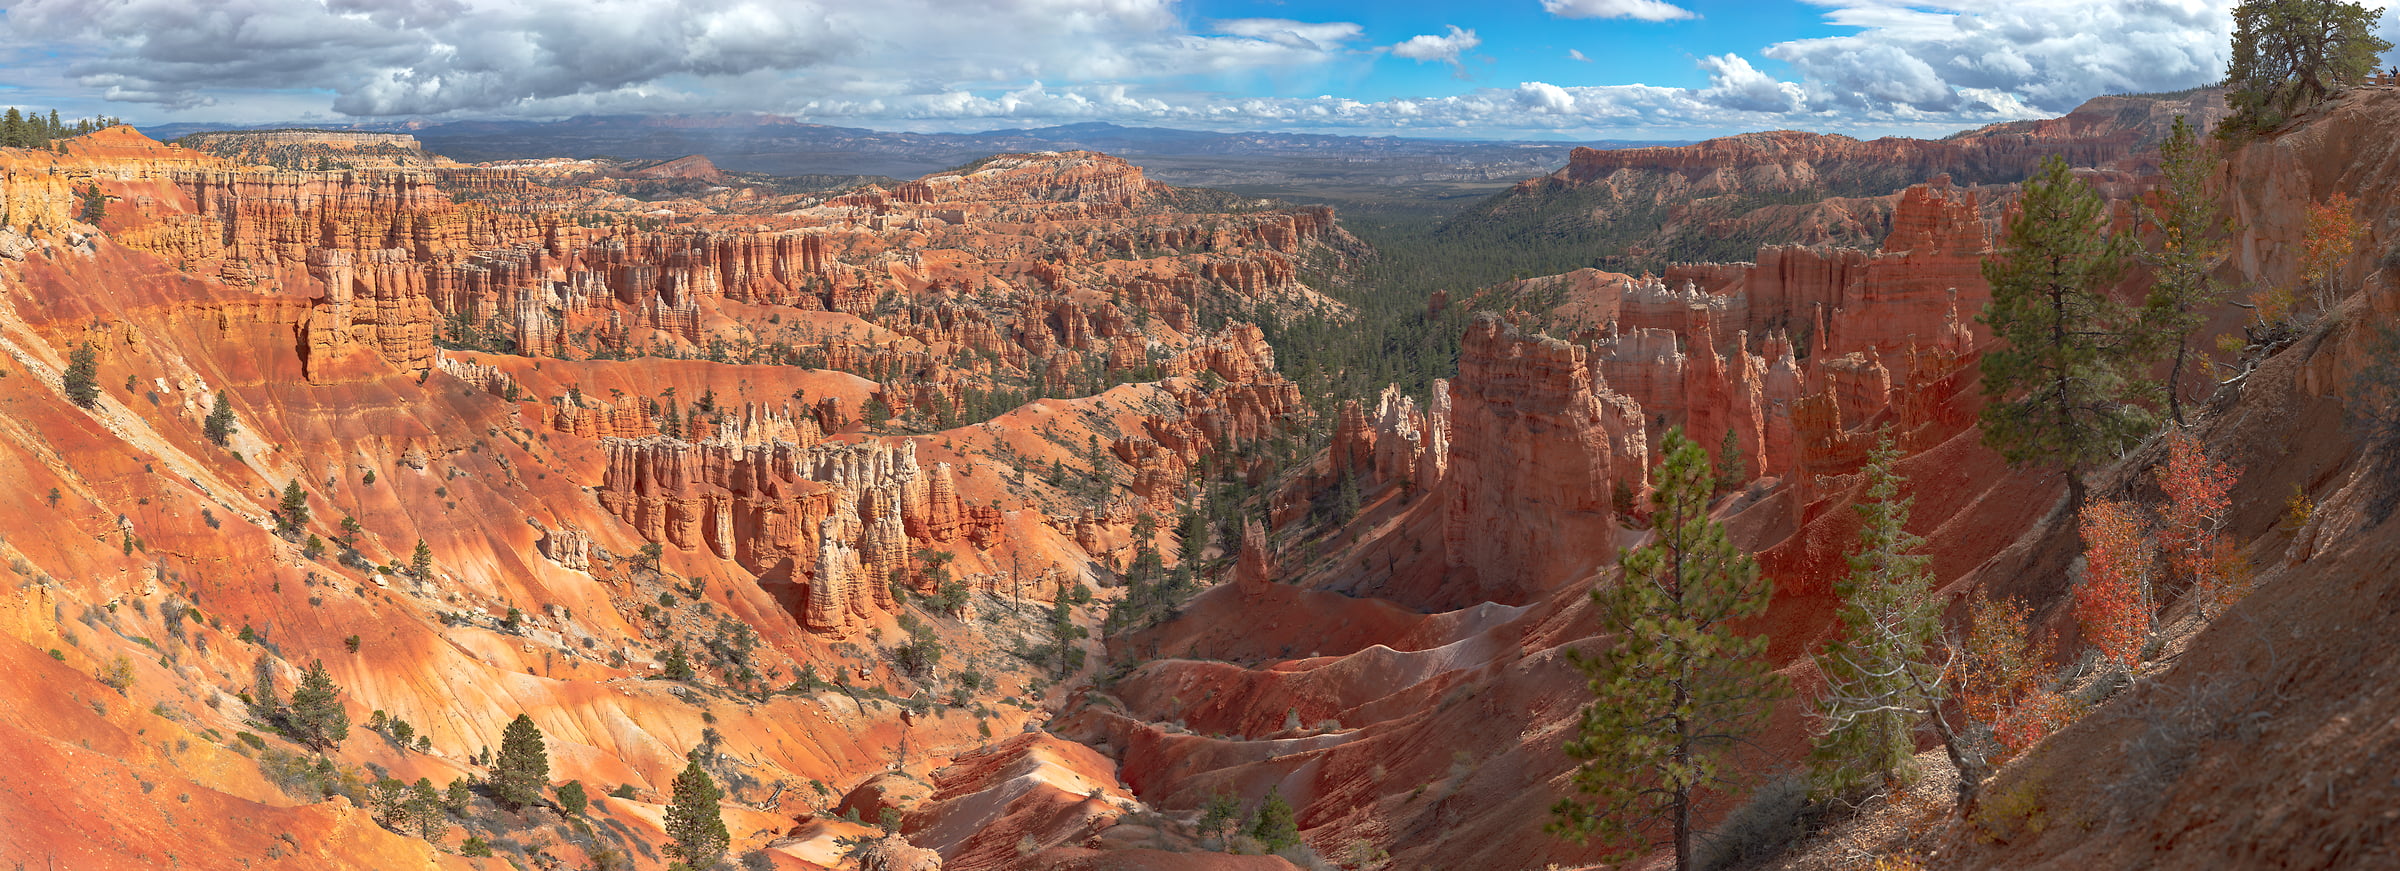 5,279 megapixels! A very high resolution, large-format VAST photo print of a great American landscape; photograph created by John Freeman at Sunset Point in Bryce Canyon National Park, New Mexico.